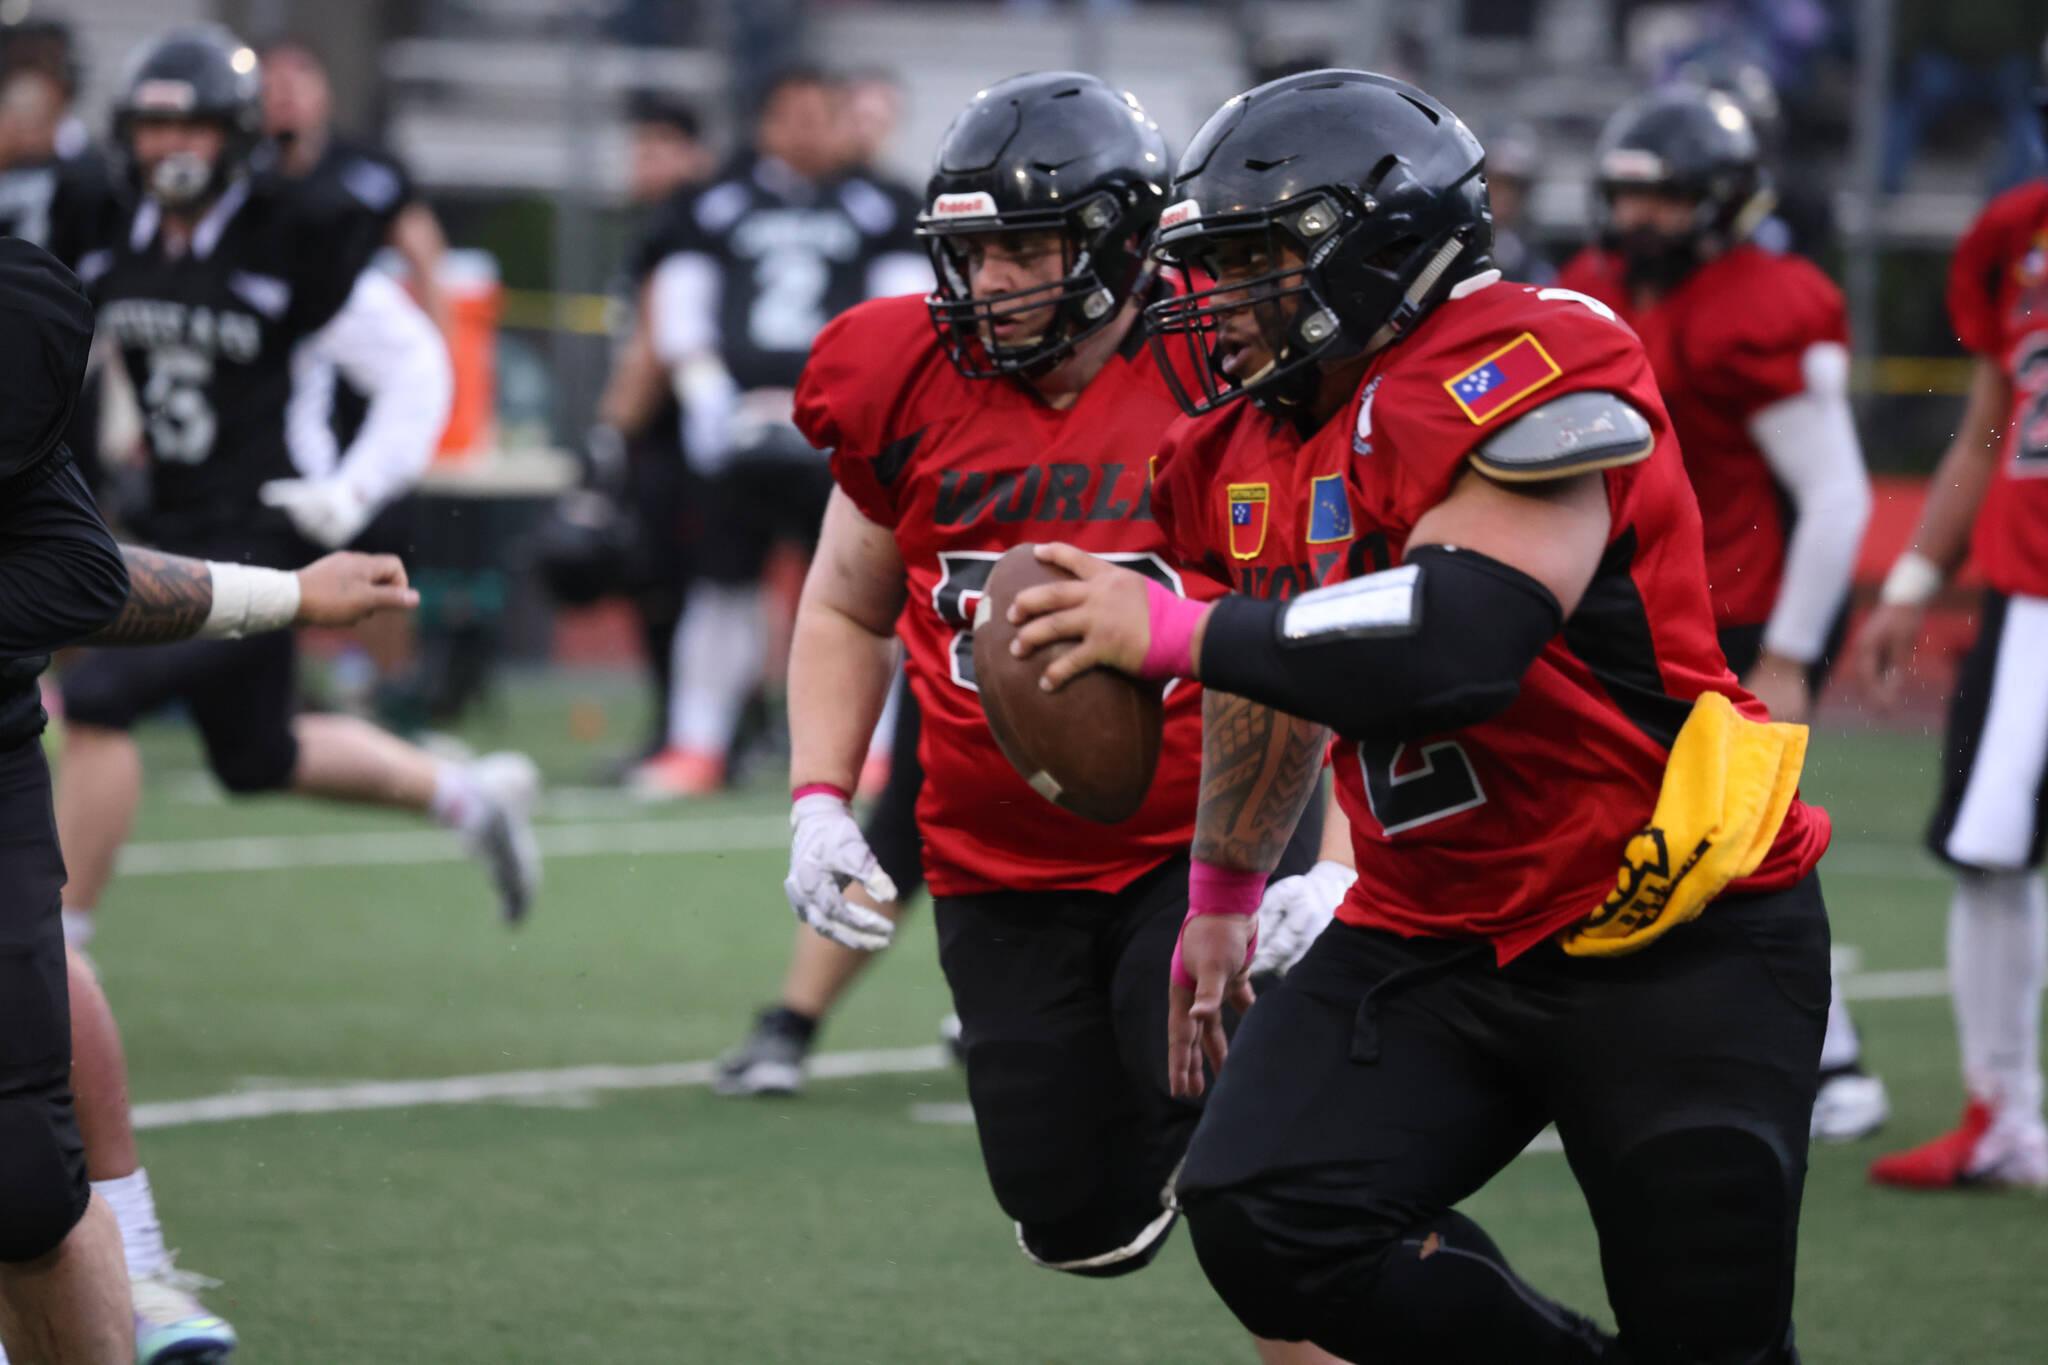 Team World’s Lance Fenumiai (2), JDHS class of 2018, rushes down the field while teammate Tristan Thomas (50), class of 2015, looks to throw a block during the 2023 Alumni Game played Friday at Adair-Kennedy Field. (Ben Hohenstatt / Juneau Empire)